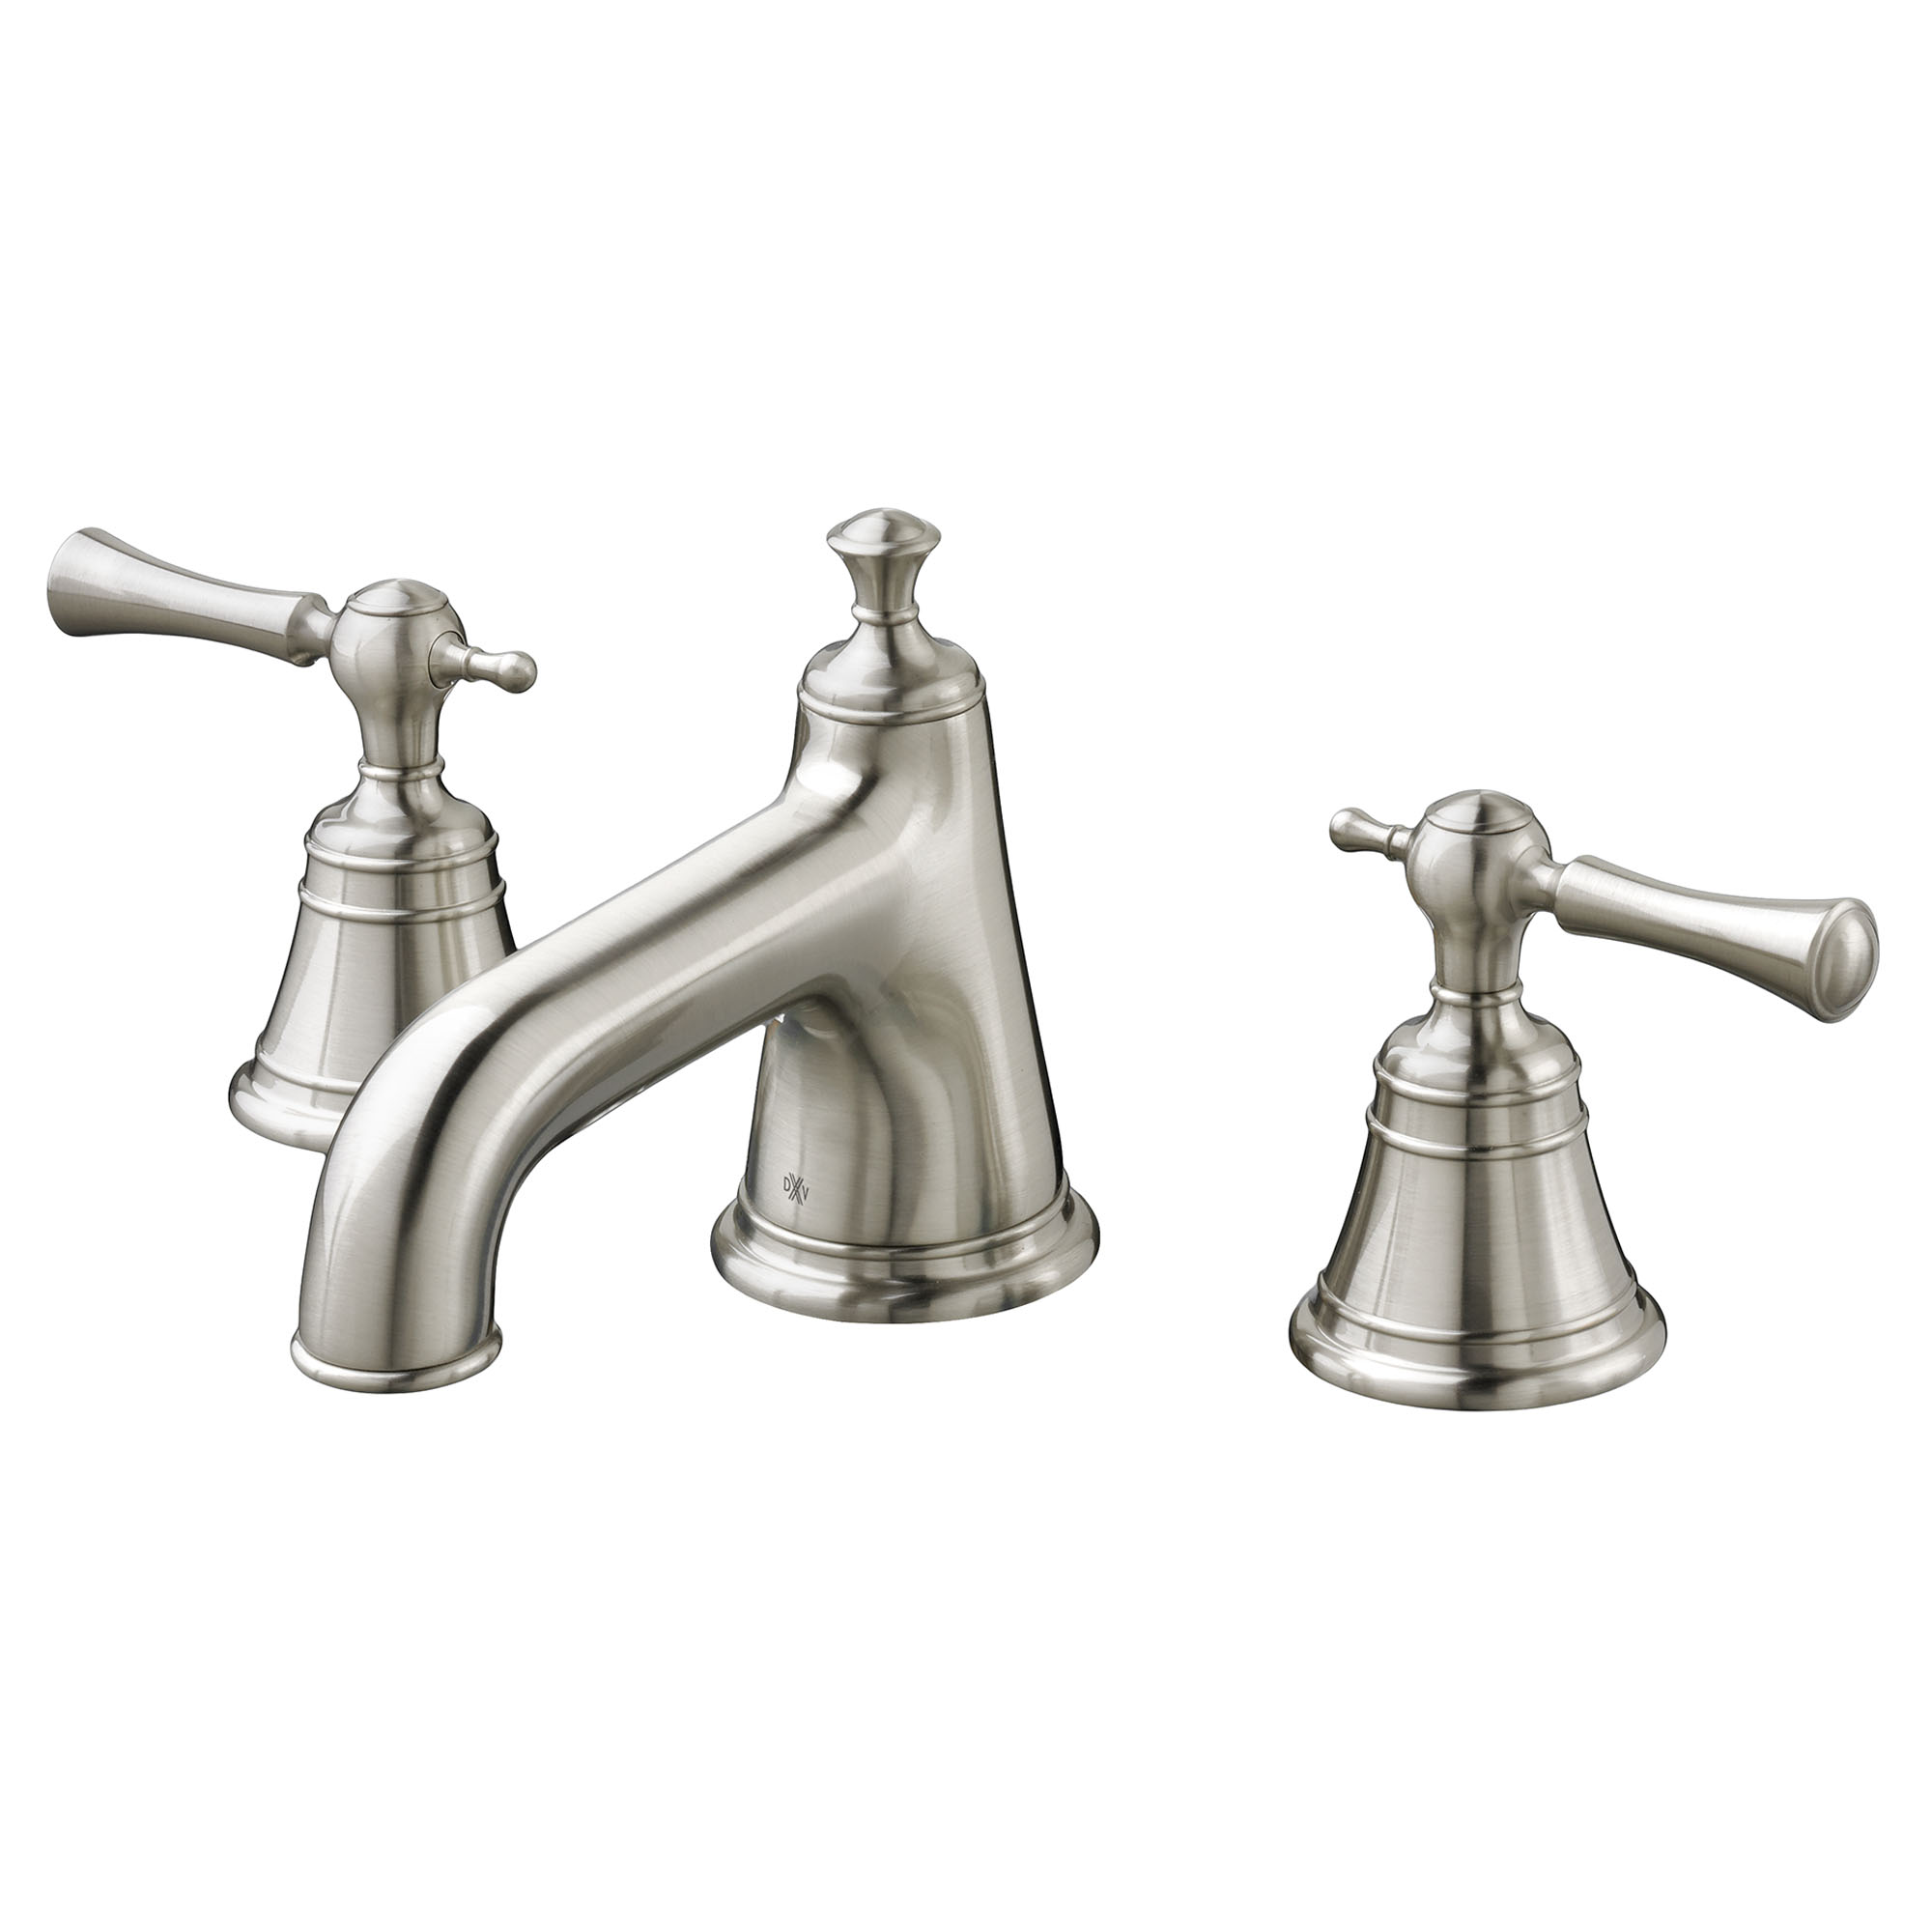 Randall 2-Handle Widespread Bathroom Faucet with Lever Handles